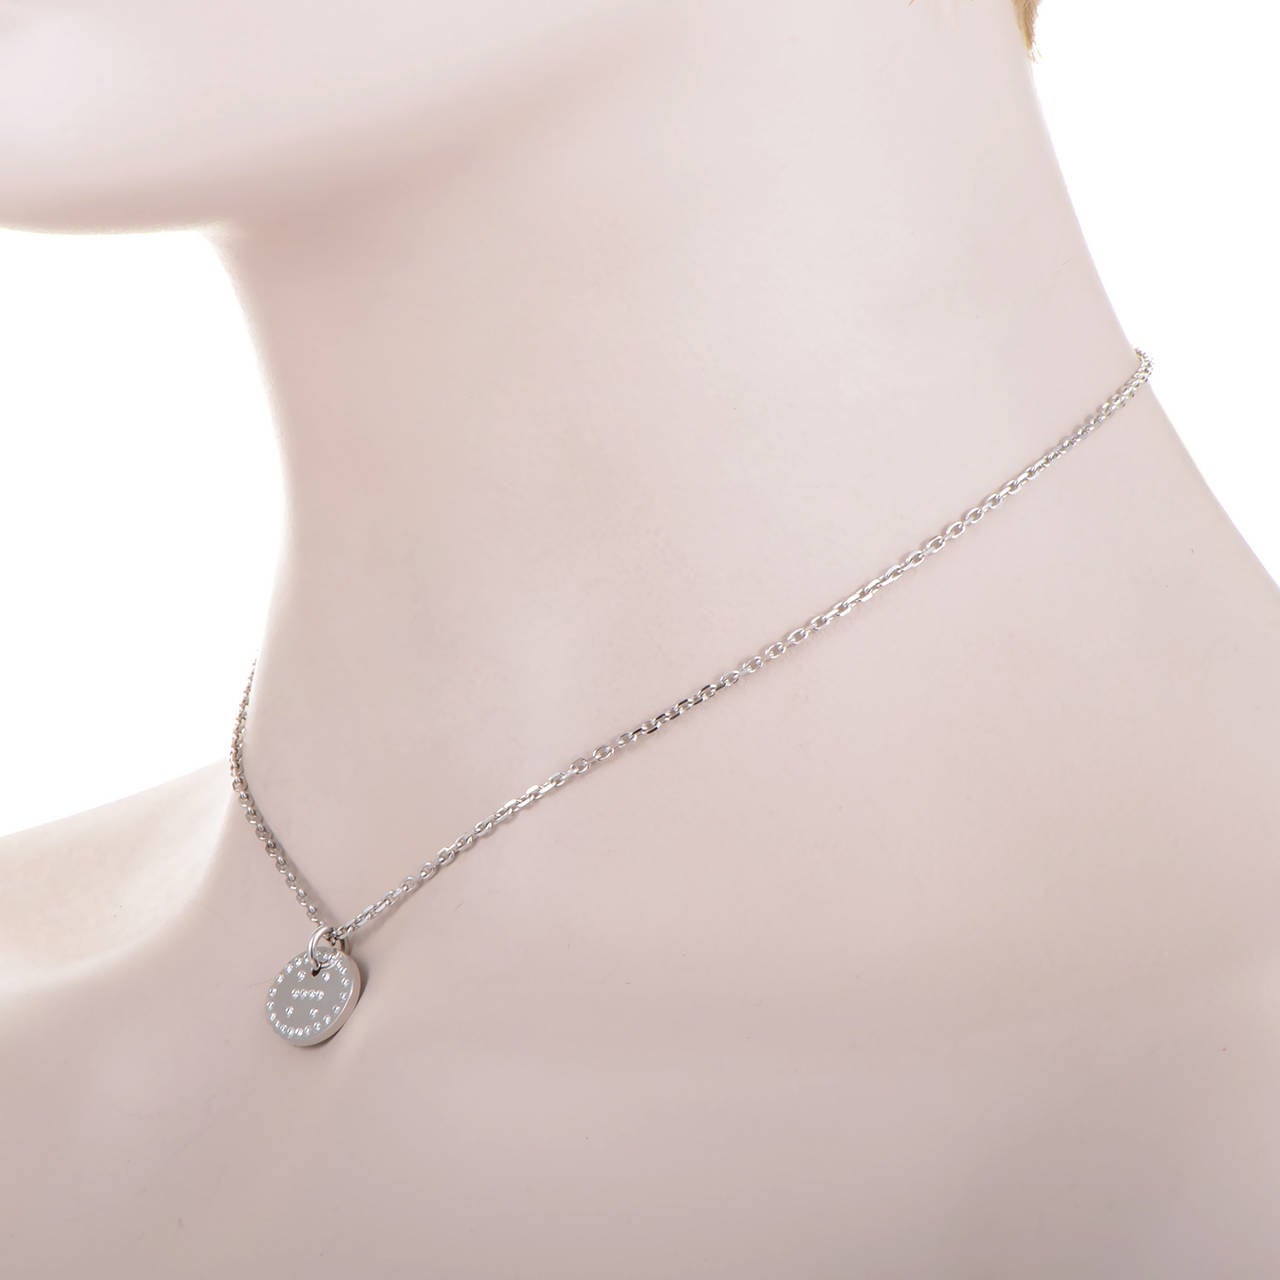 This pendant necklace from Hermes' Eclipse collection is is simple and sweet. The necklace is made of 18K white gold and boasts a disc-shaped pendant set with diamonds and displaying the brand's signature 